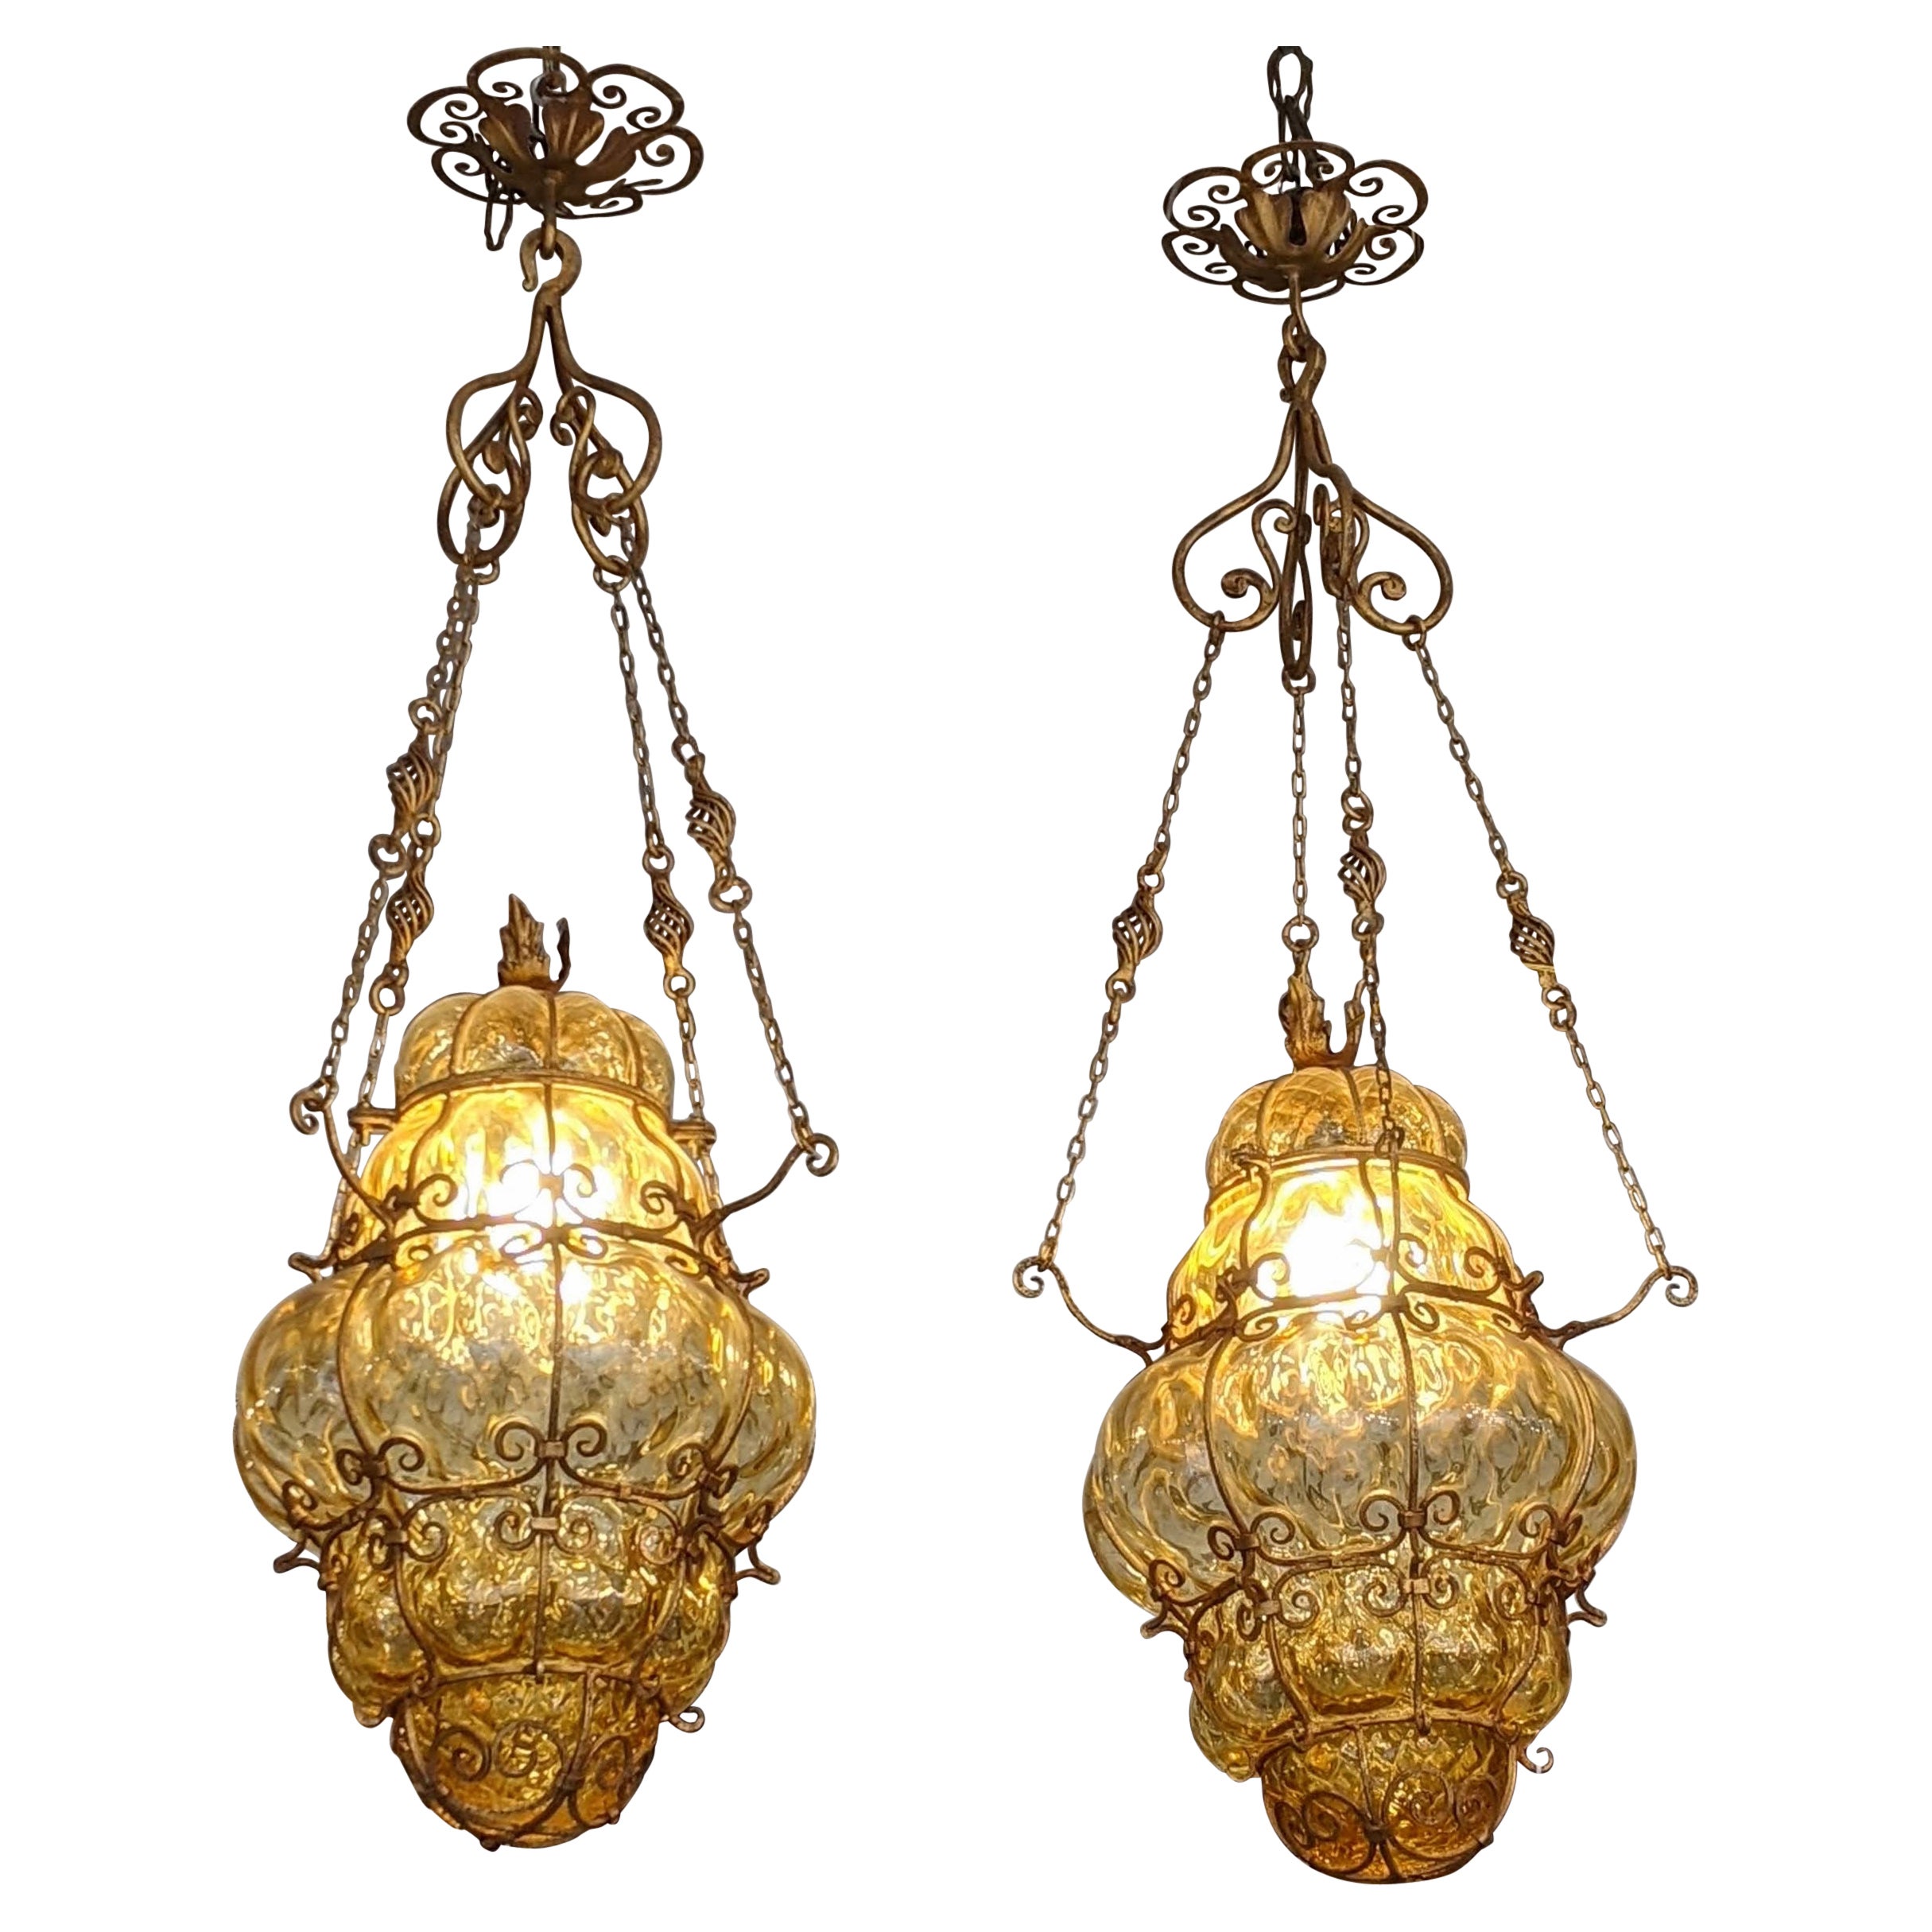 Pair of Blown Murano Glass and Wrought Iron Lamps, Early 20th Century For Sale